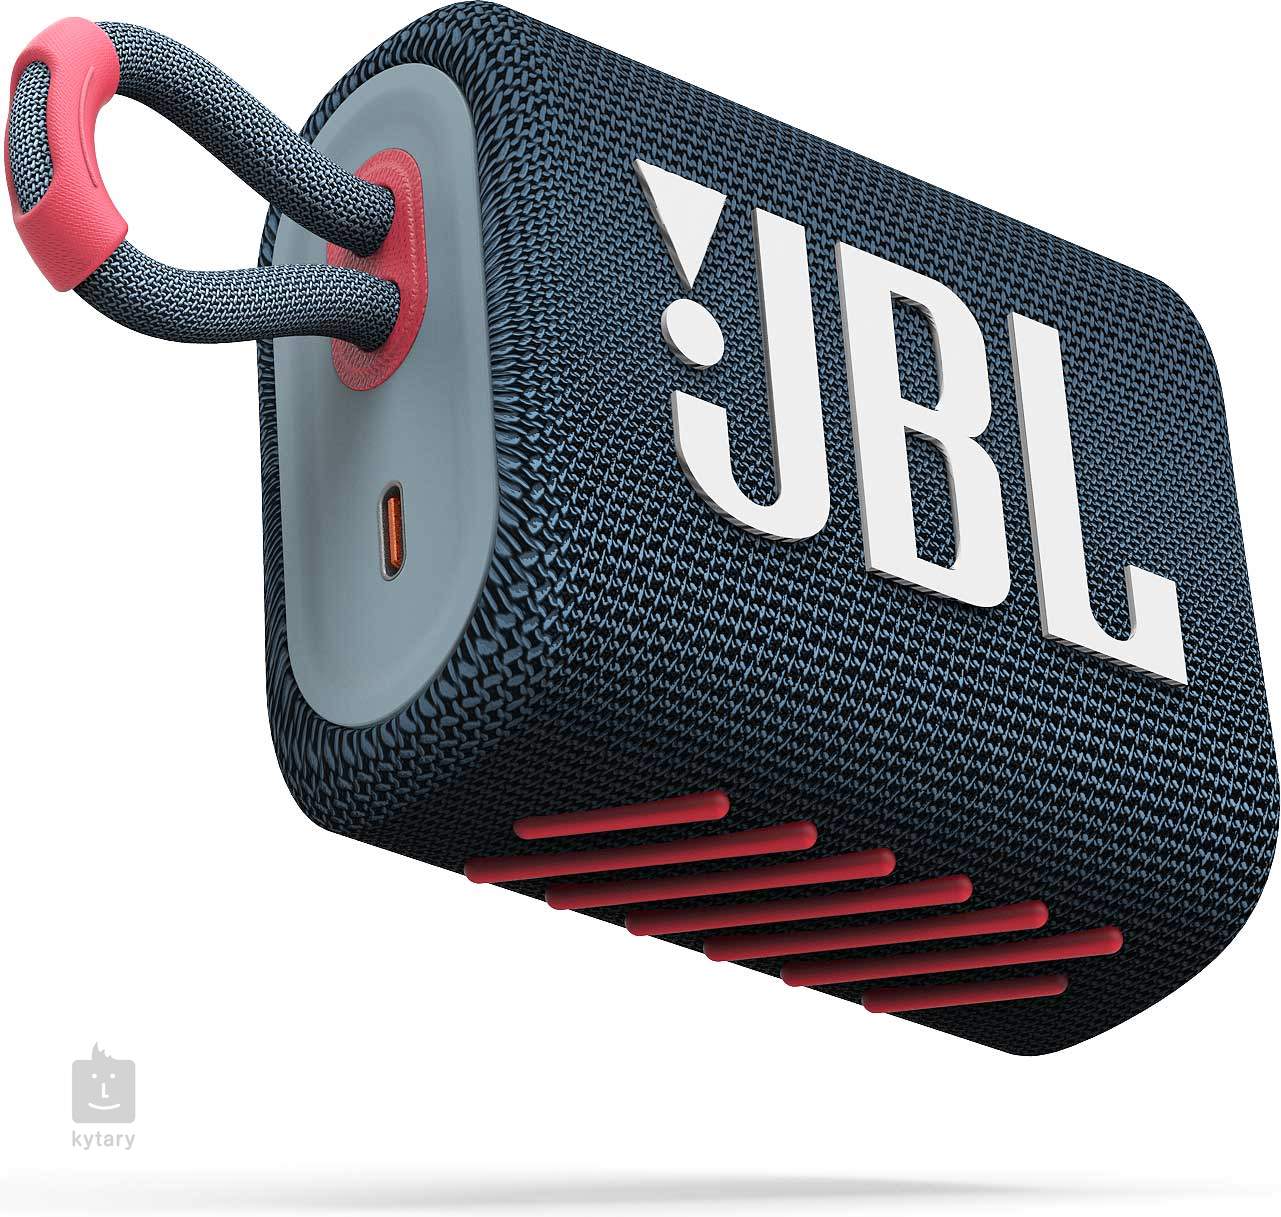 JBL GO 3 specifications